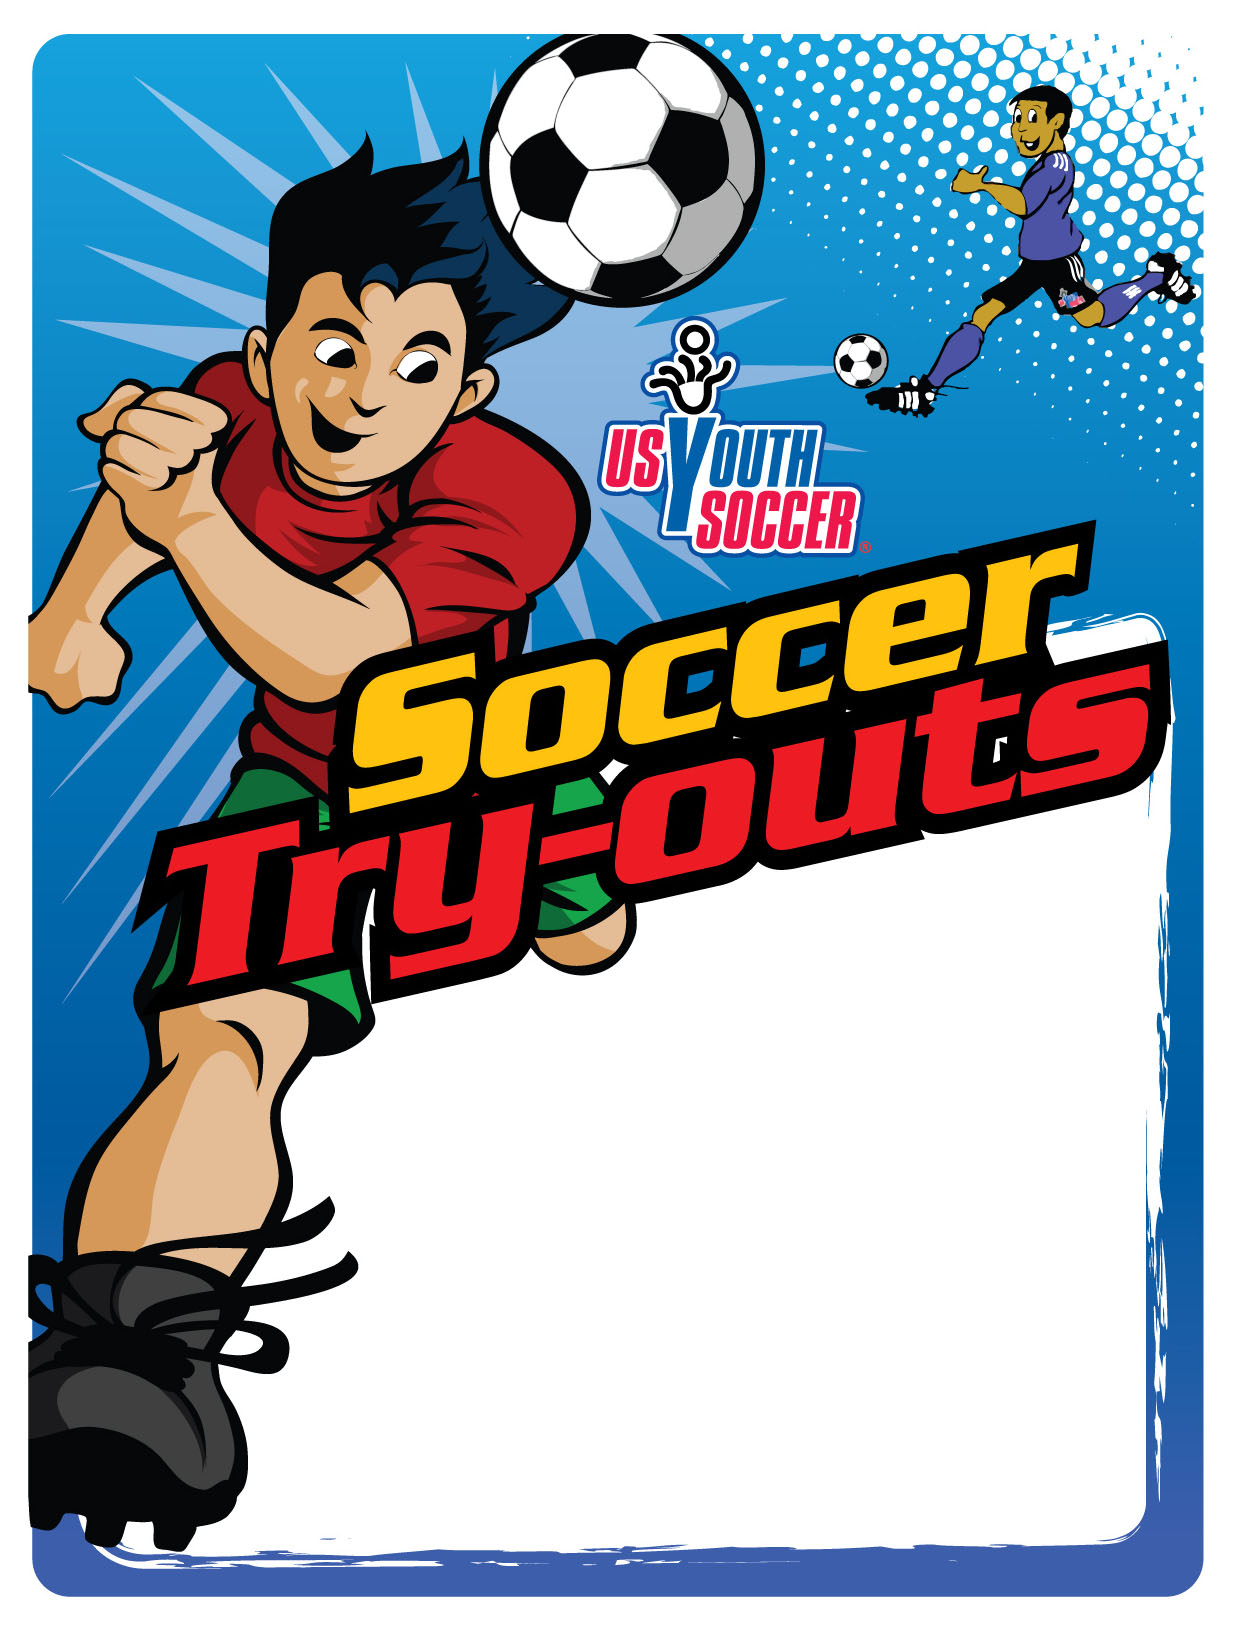 Toolkit for Membership | US Youth Soccer